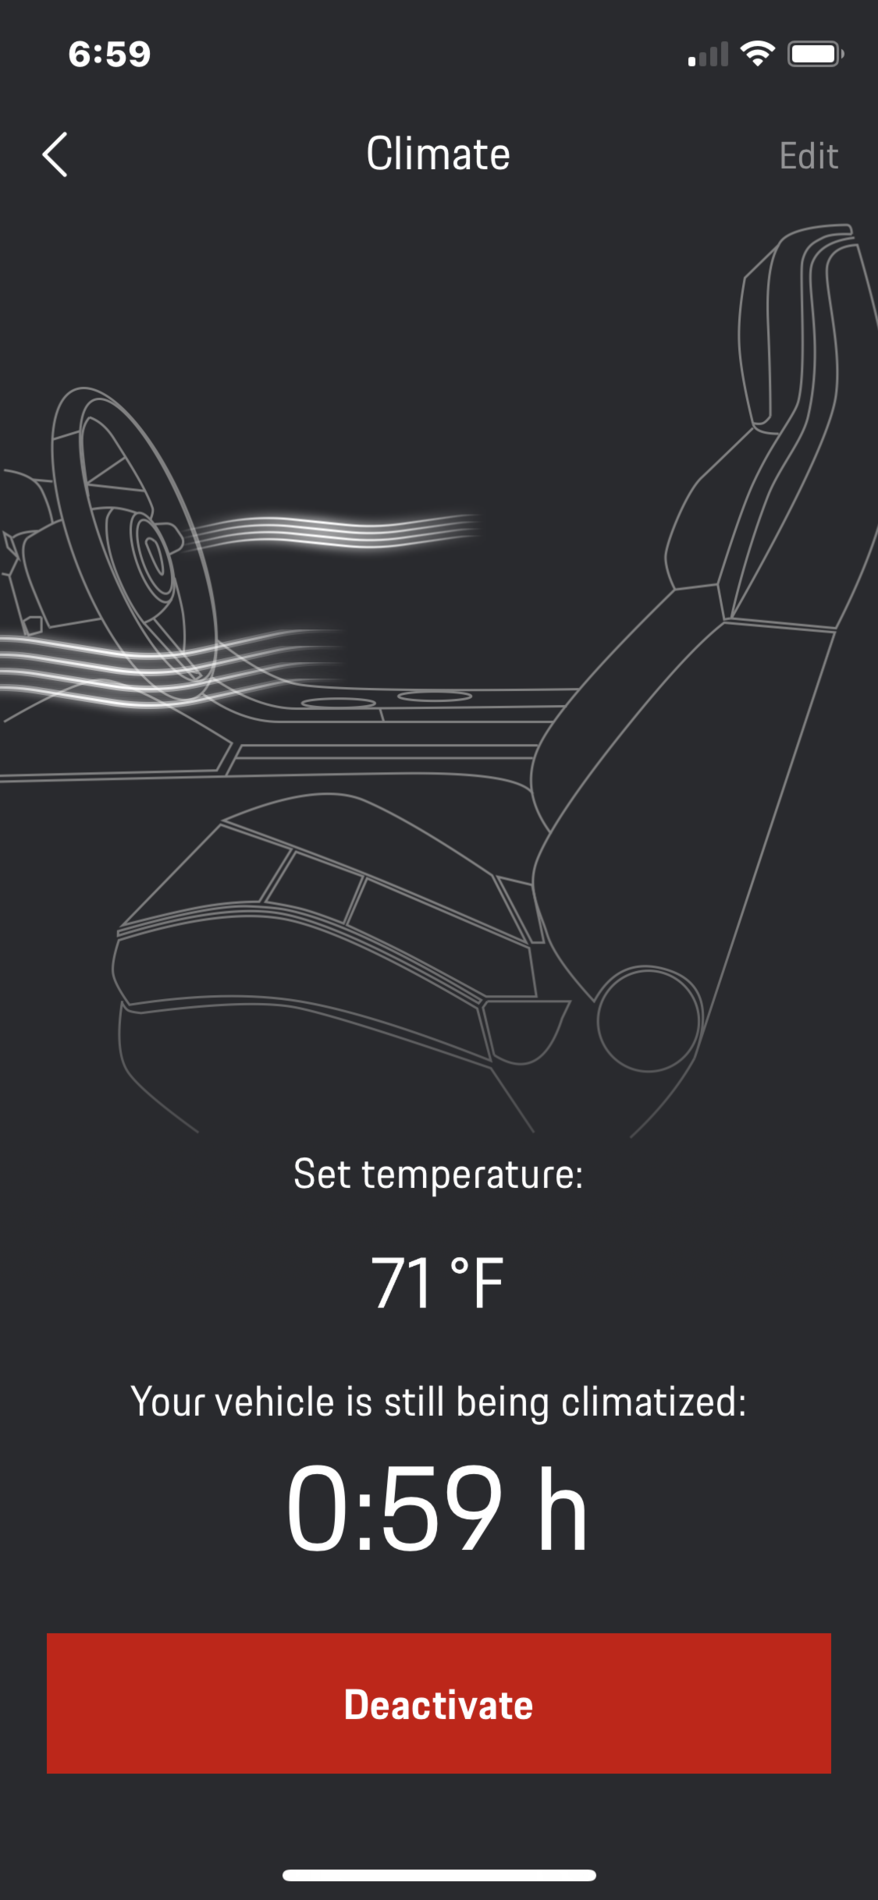 Porsche Taycan Connect App and Remote Control of Climate Control IMG_2410.PNG